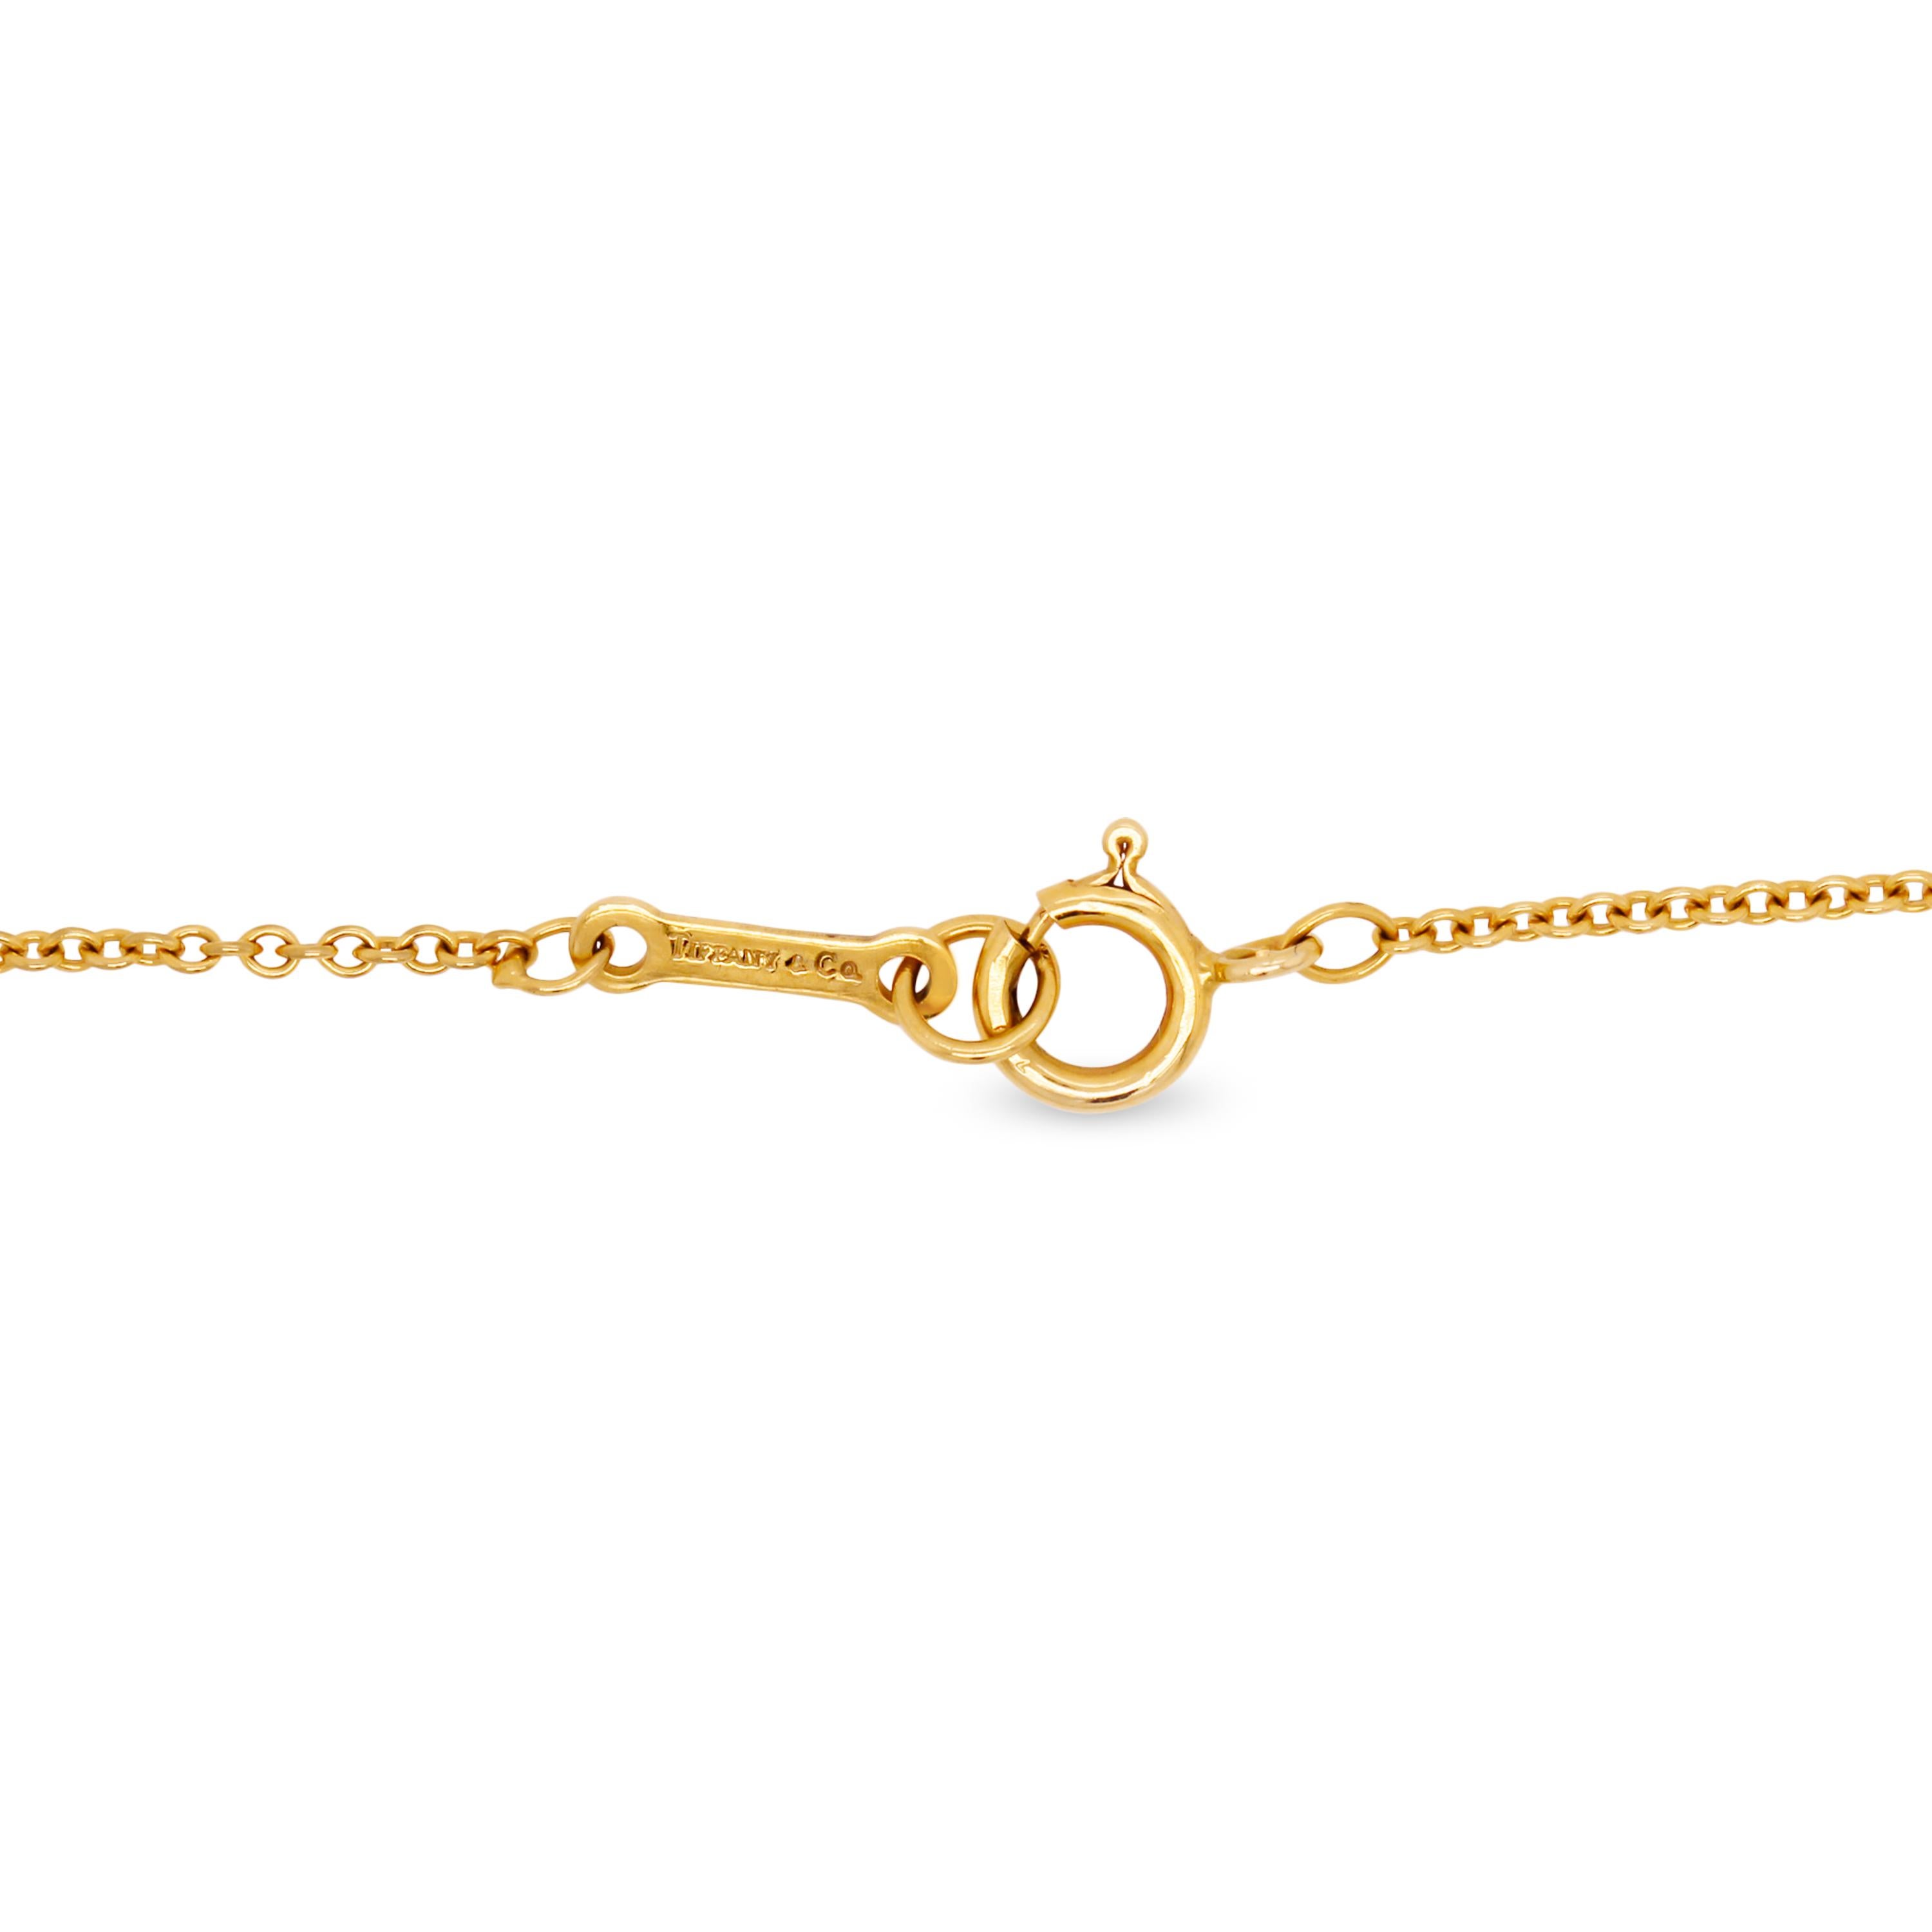 Tiffany & Co Elsa Peretti 18 Karat Gold Large Bean Pendant Necklace

18.5mm width of Bean. (0.75 inch).

Chain is 14 inches in length.

Signed Tiffany & Co. Peretti